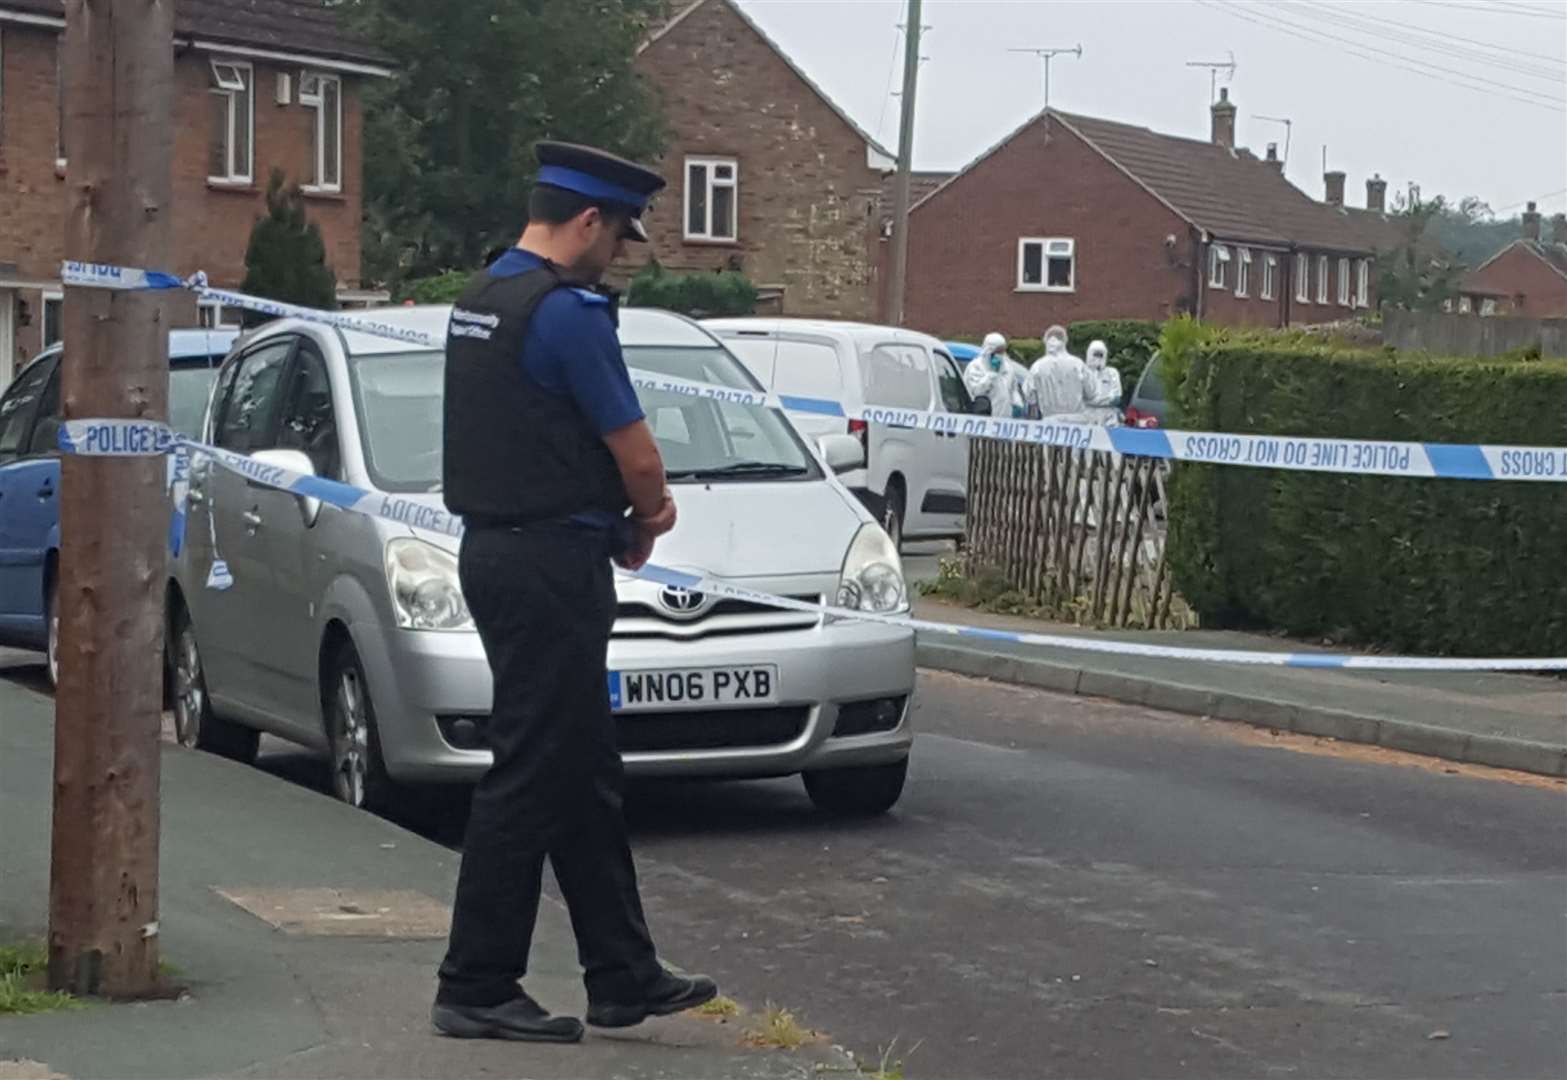 Police have cordoned off the street and forensics are in attendance